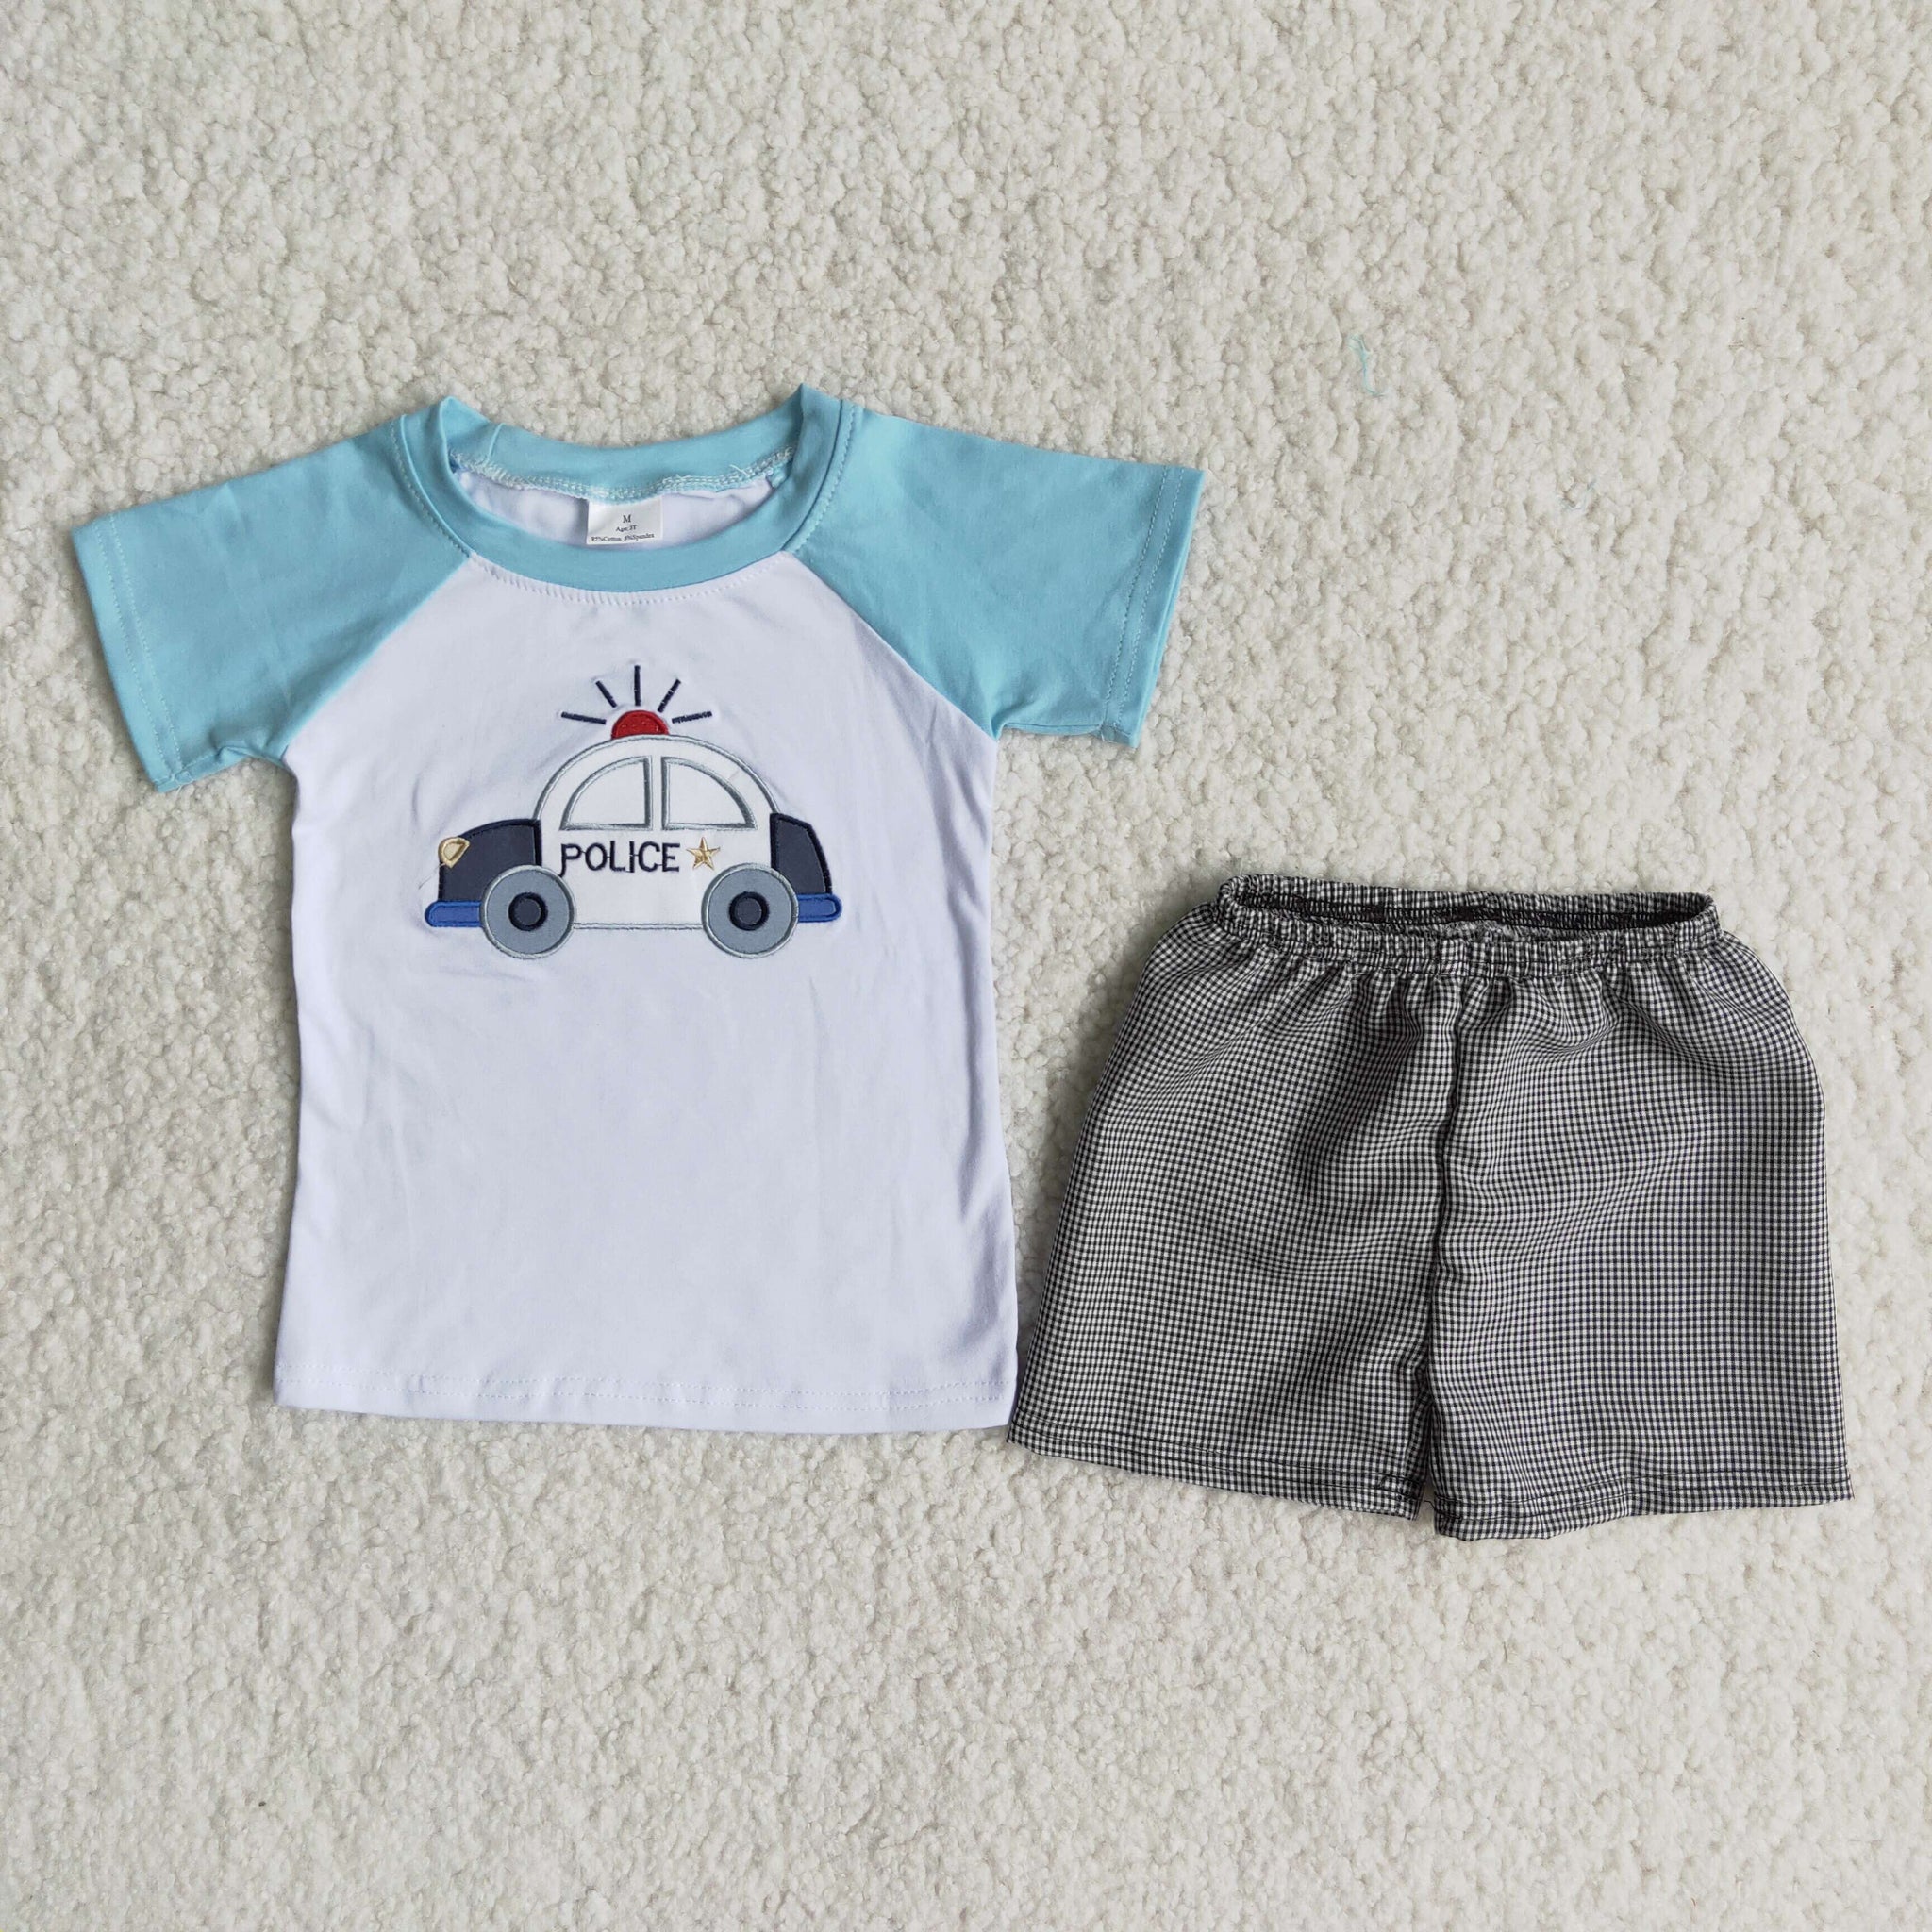 B18-4 baby boy clothes embroidery police summer outfits